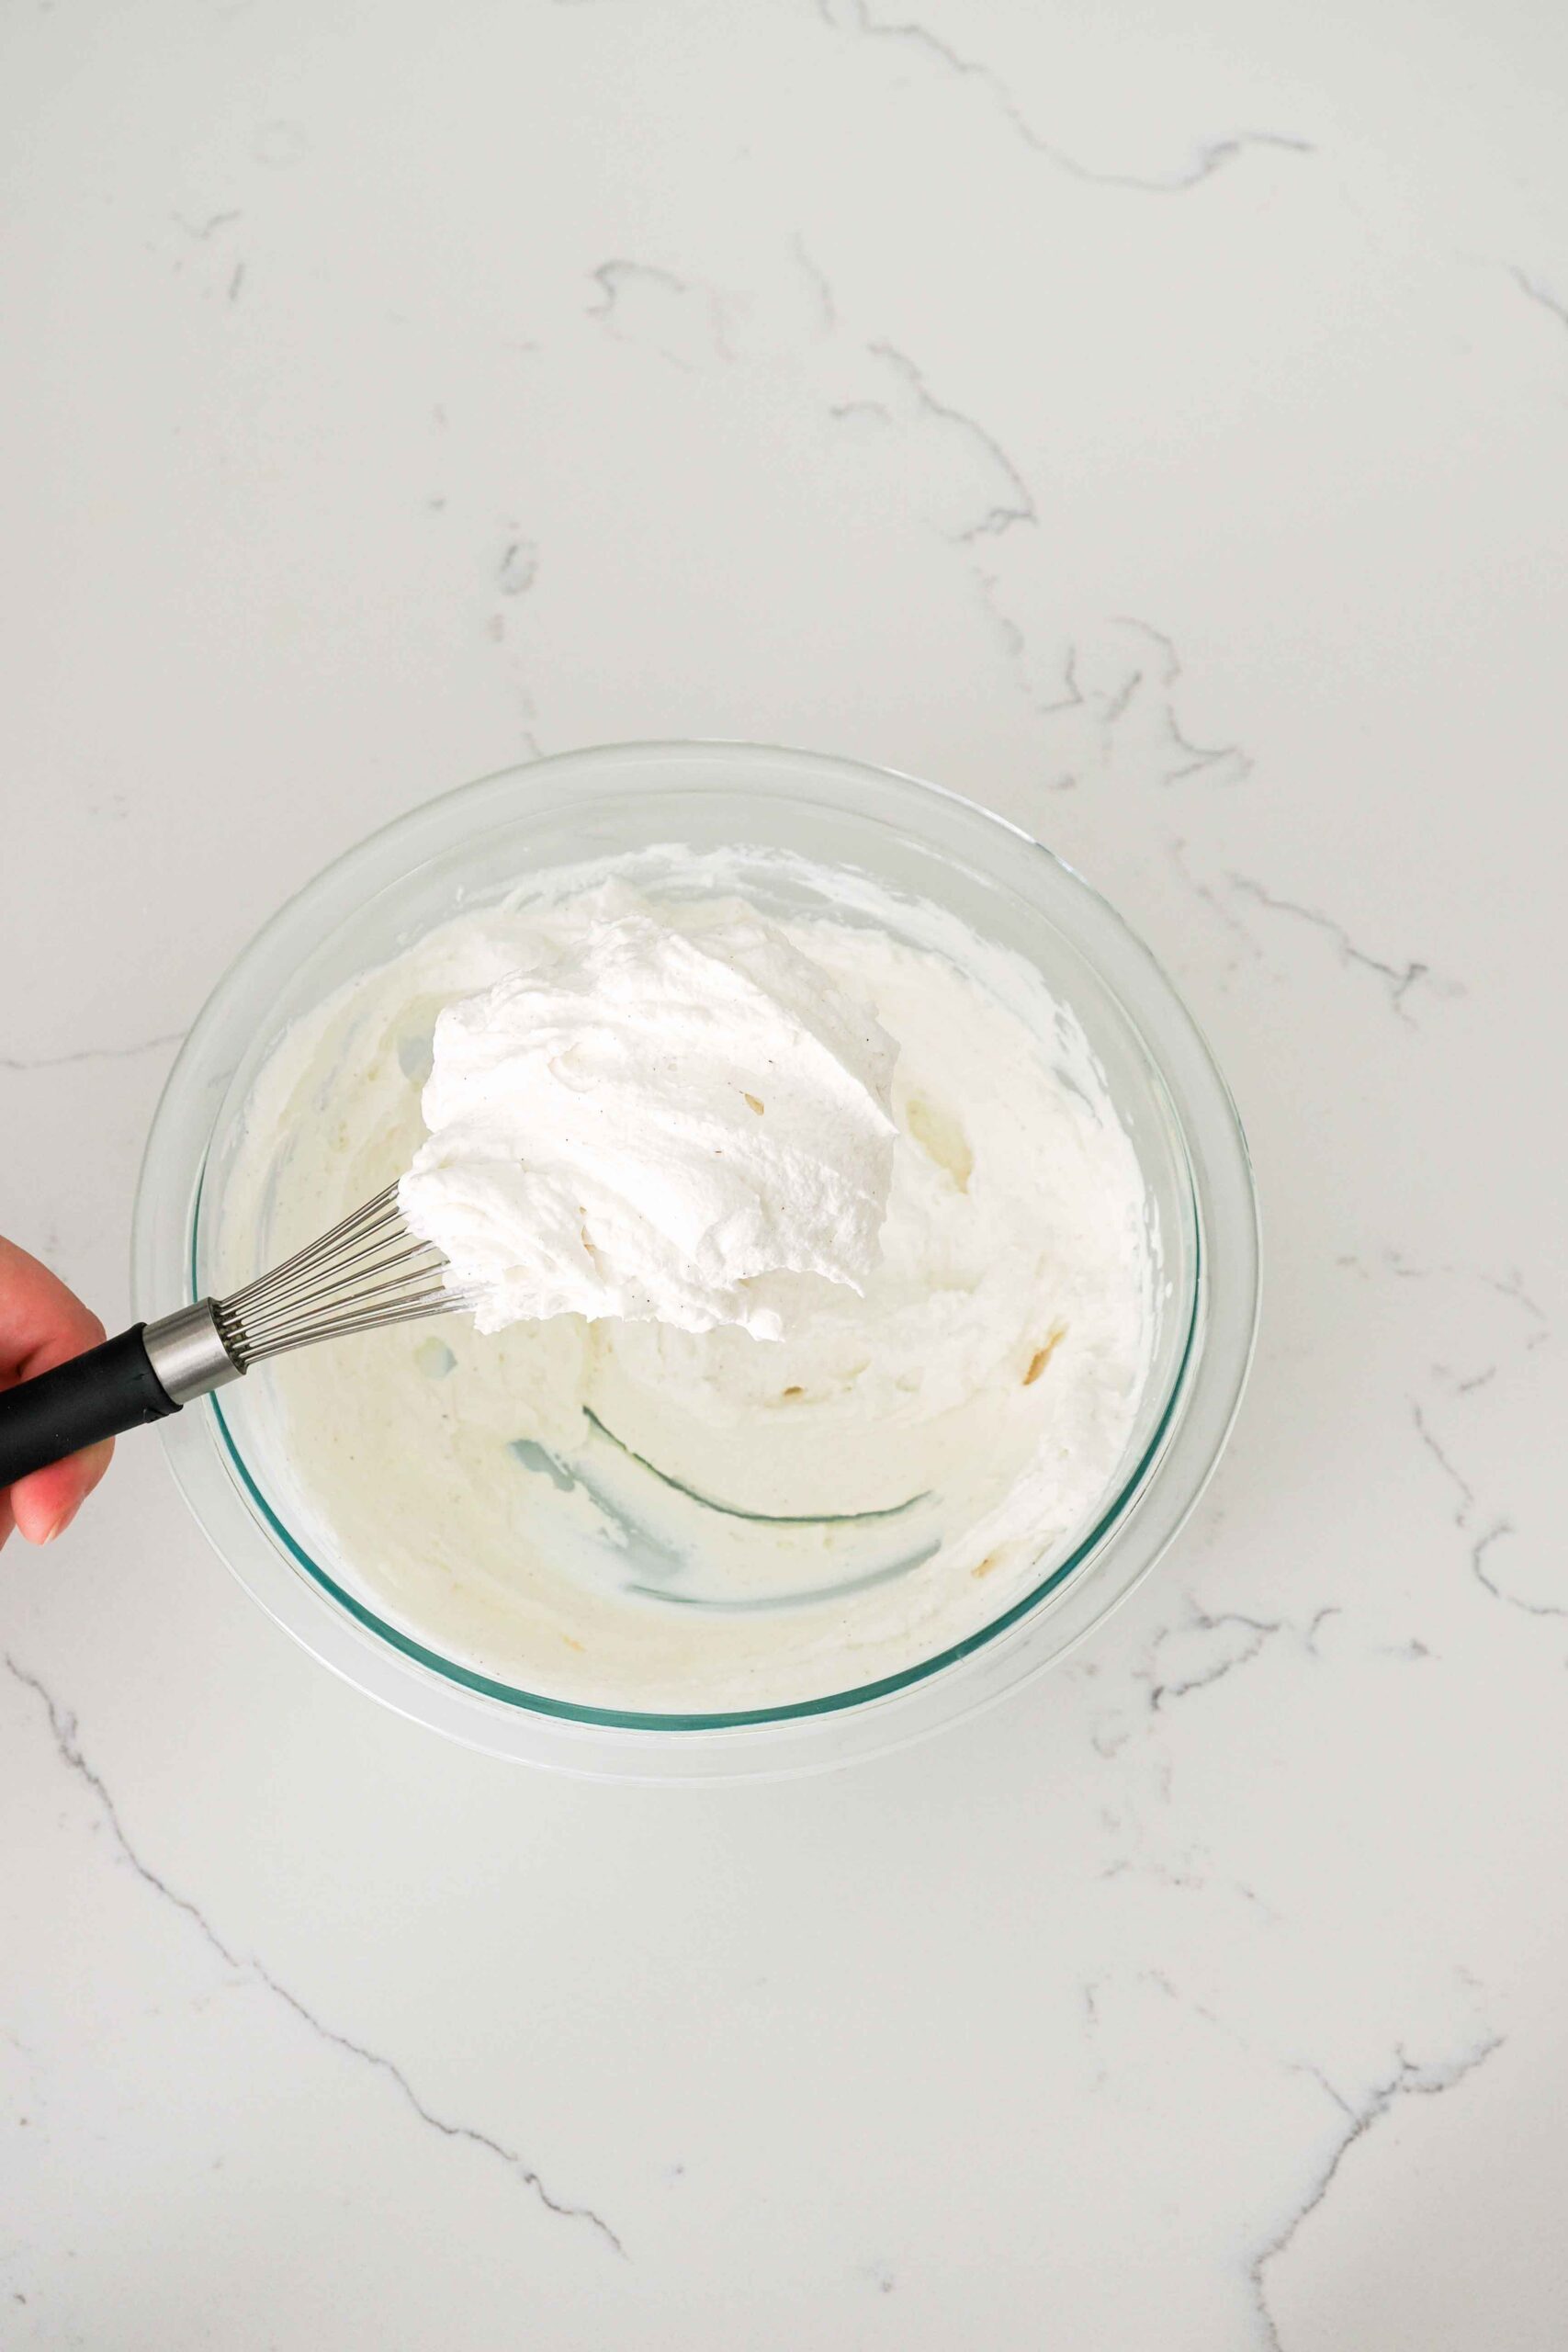 A whisk holds up a clump of whipped cream with stiff peaks.